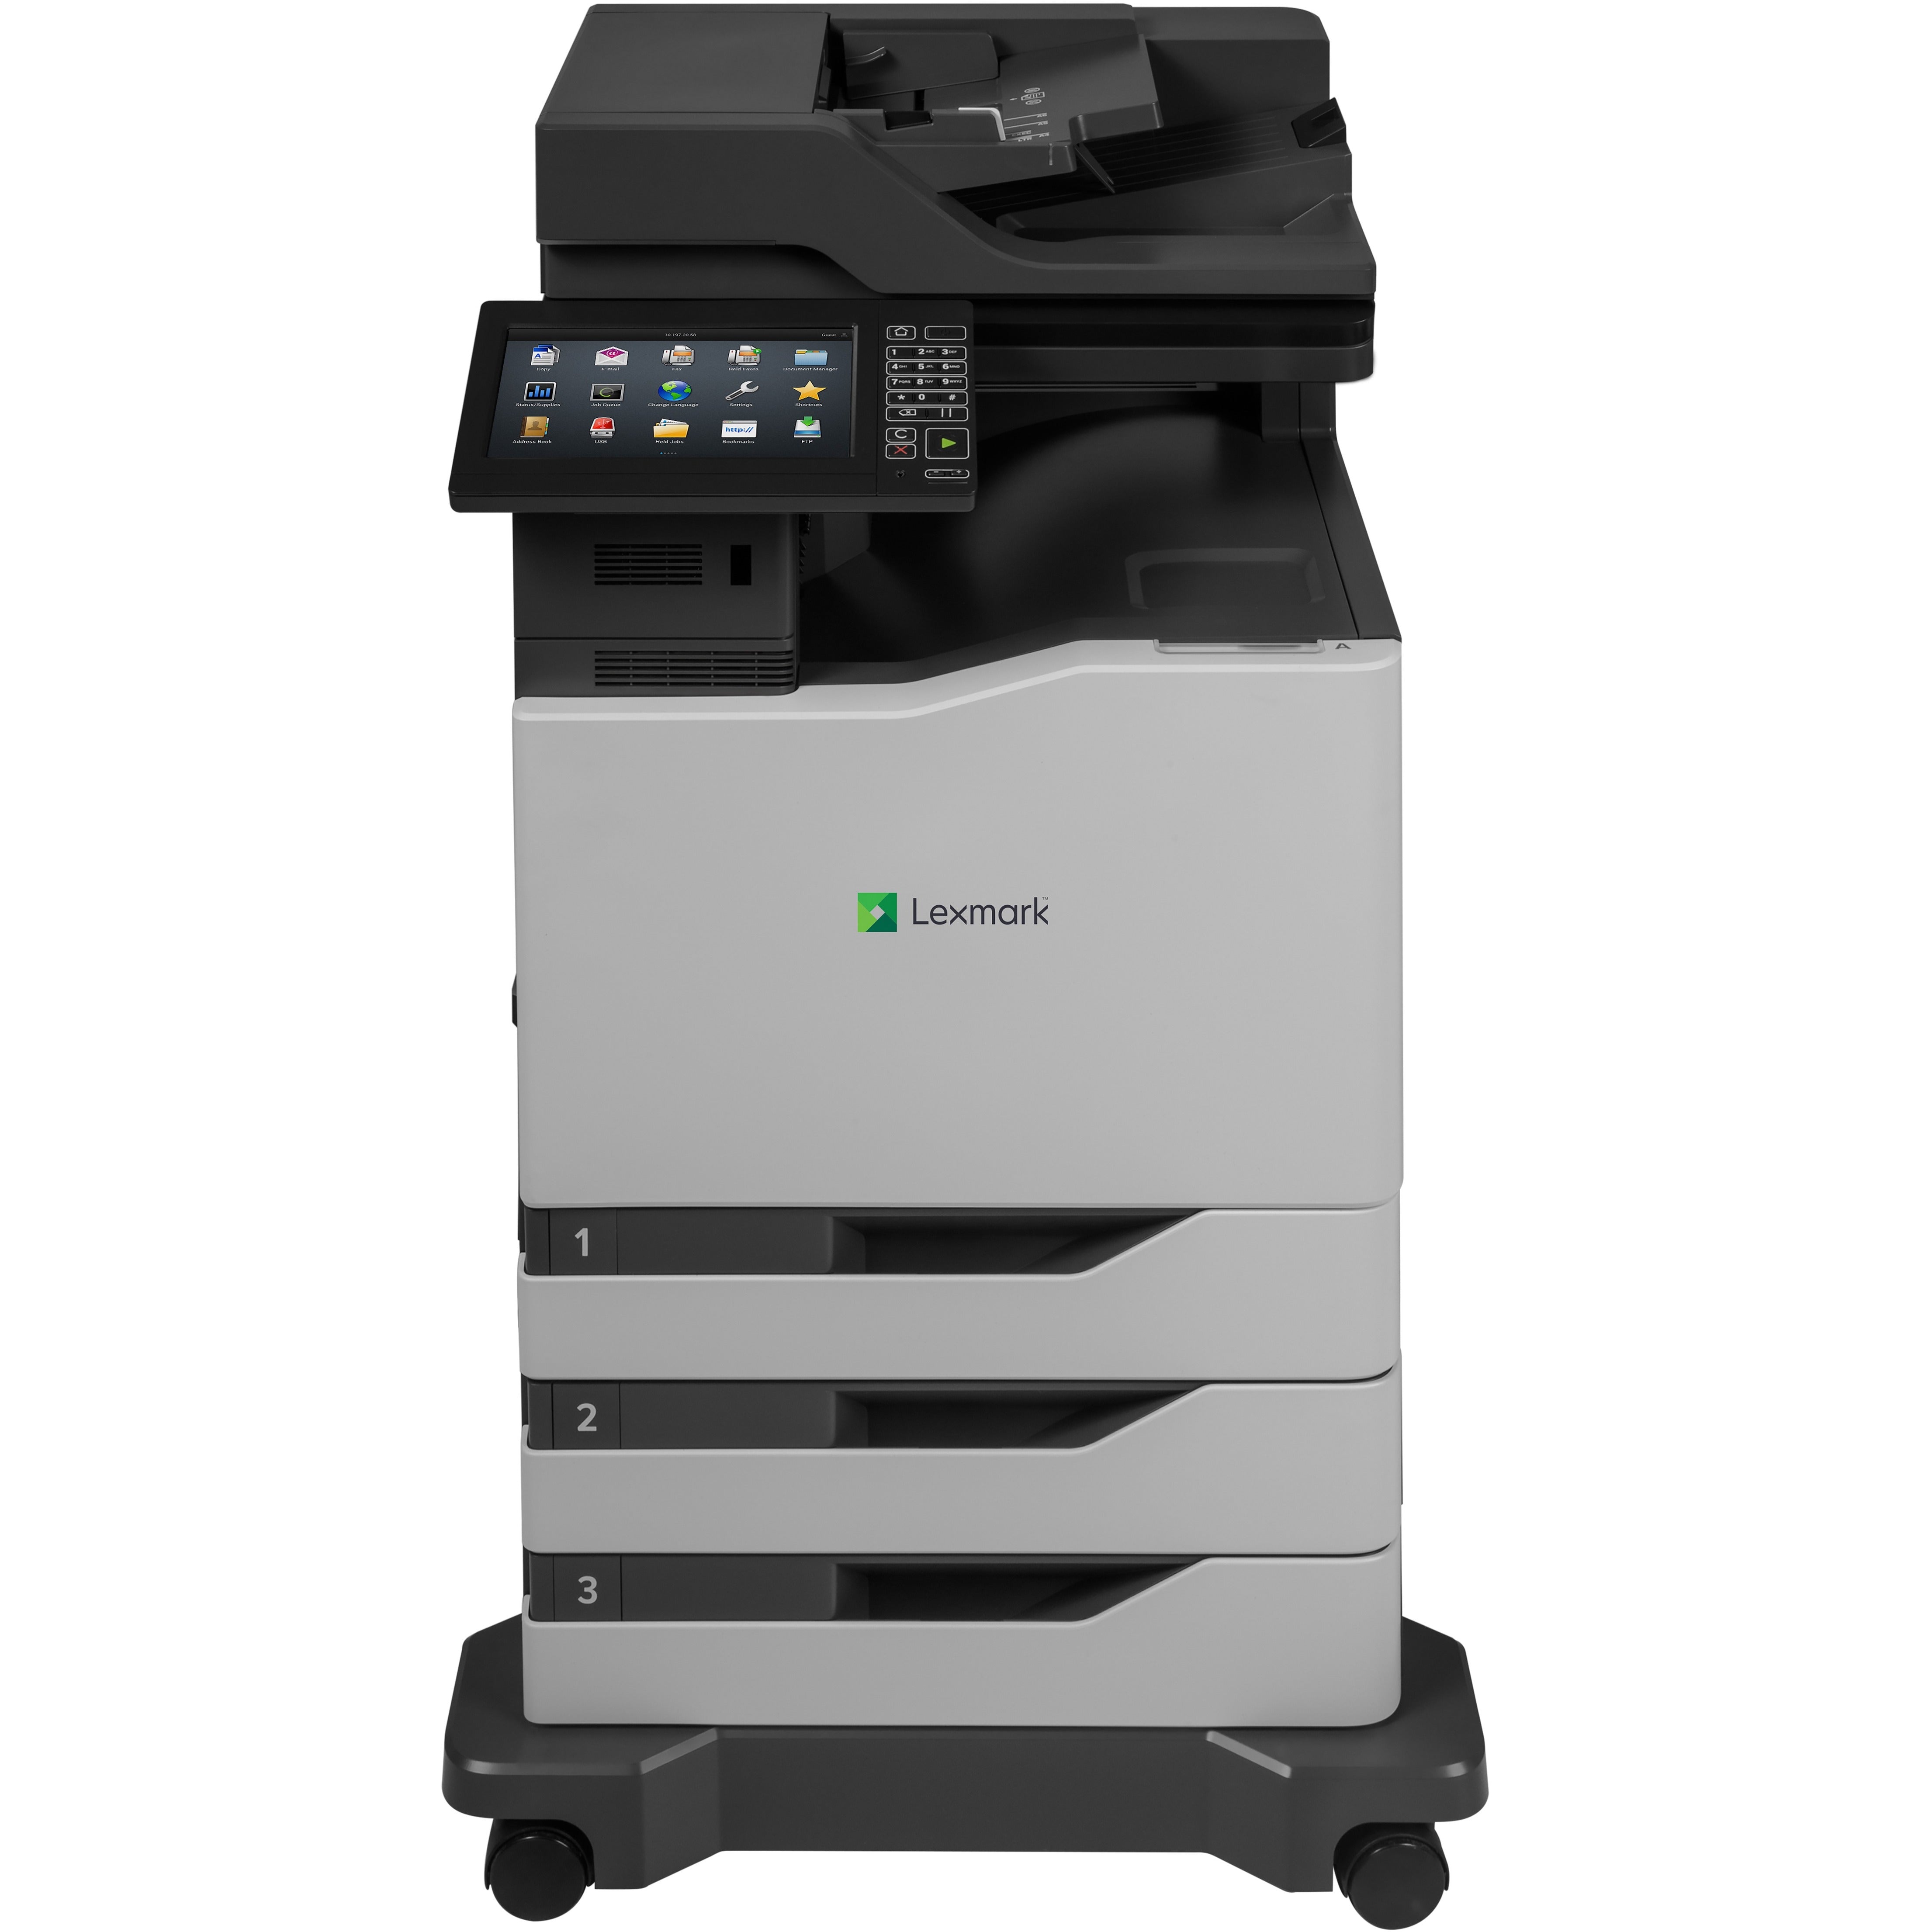 Lexmark 42KT251 CX825dte Laser Multifunction Printer, Color, Flatbed, 1 Year Warranty, 250,000 Duty Cycle, TAA Compliant, Energy Star, USB, AC Supply, 230V AC, 10 Touchscreen